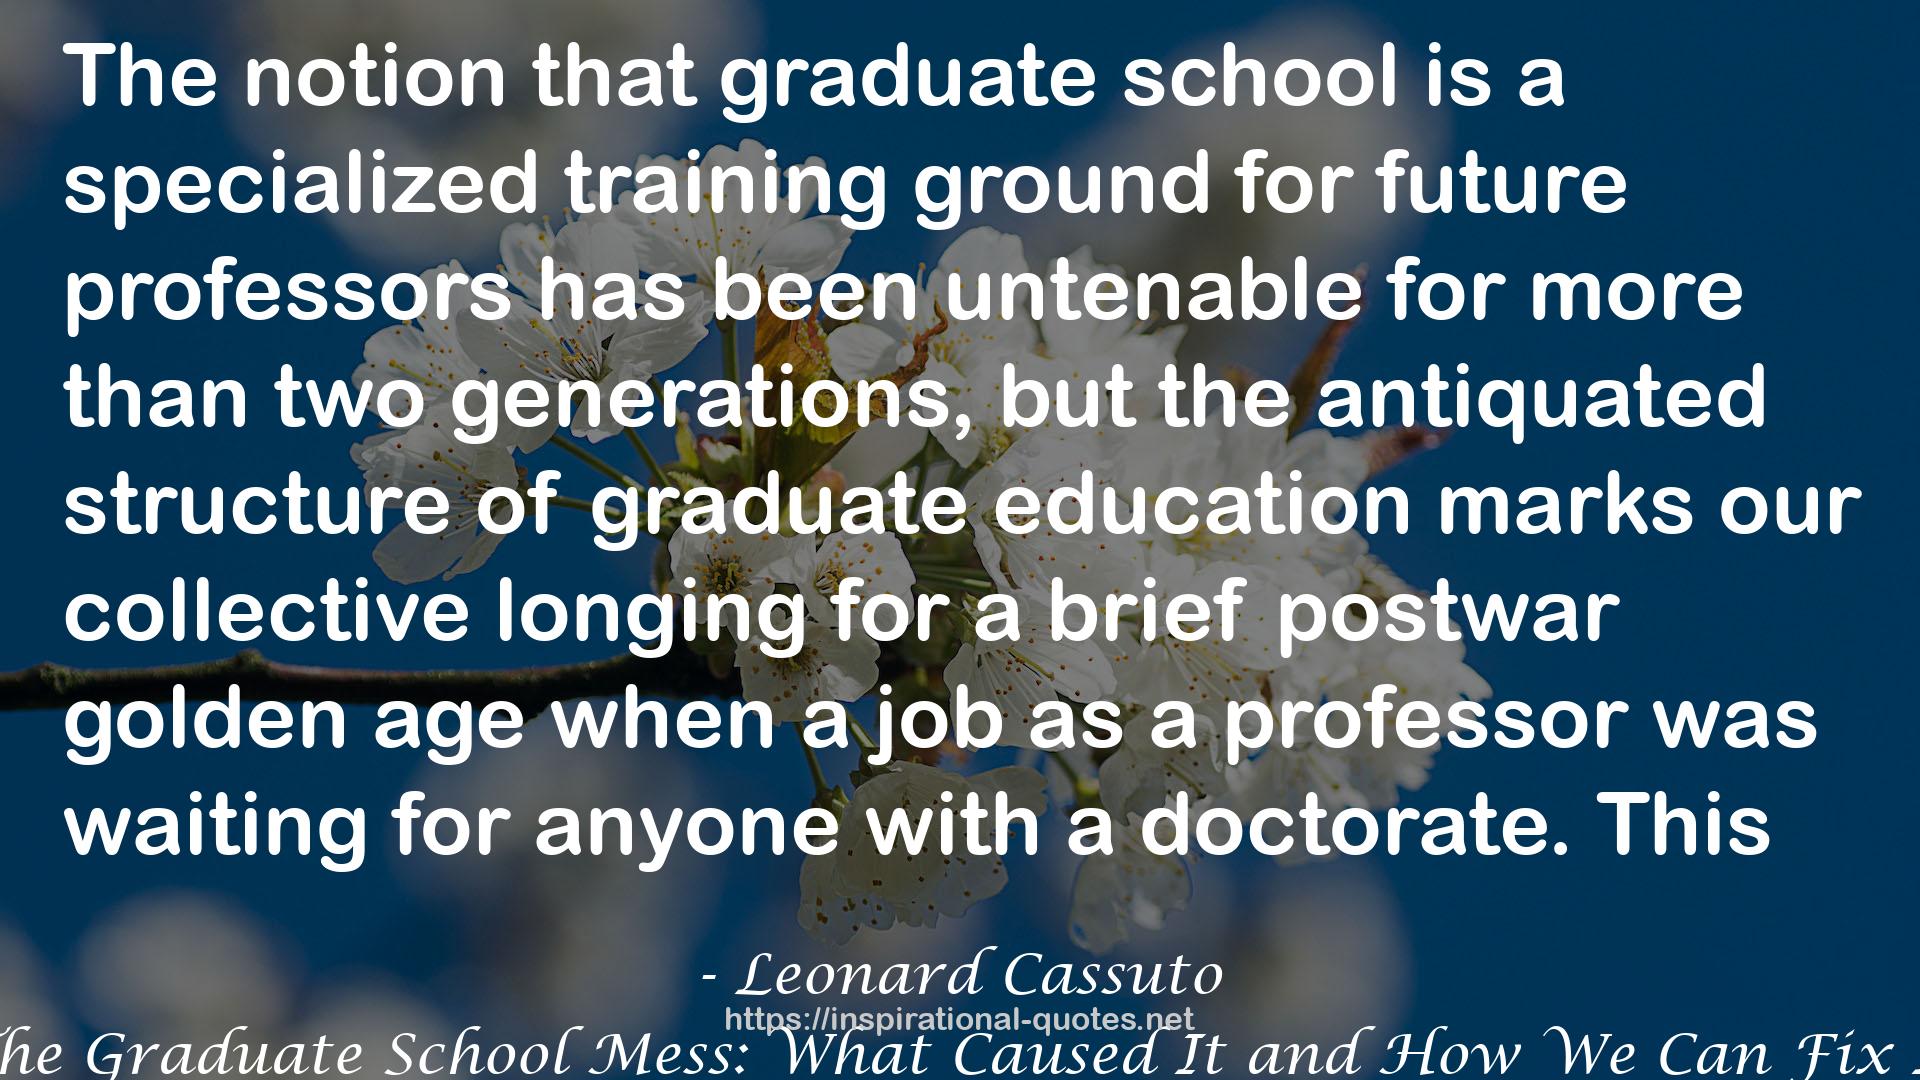 The Graduate School Mess: What Caused It and How We Can Fix It QUOTES